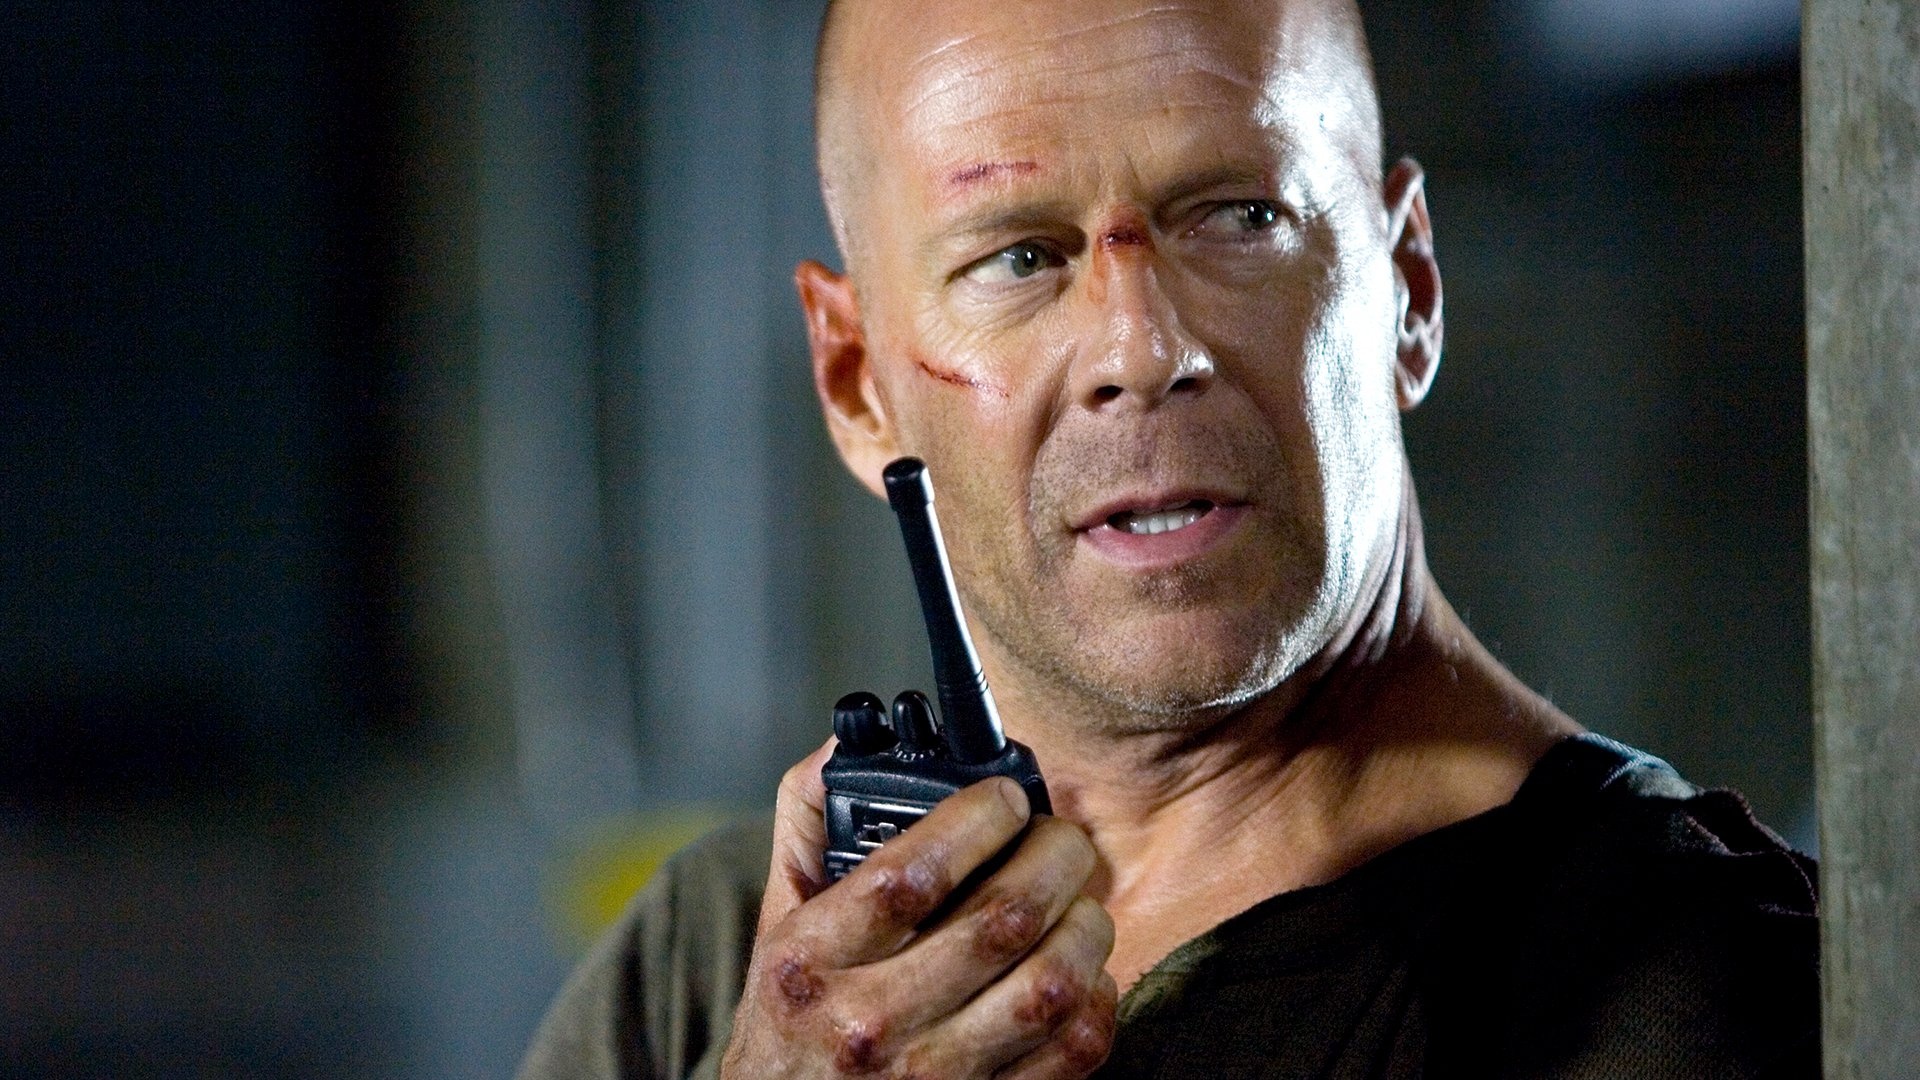 Live Free or Die Hard, Full movie online, High-adrenaline experience, Action-packed, 1920x1080 Full HD Desktop